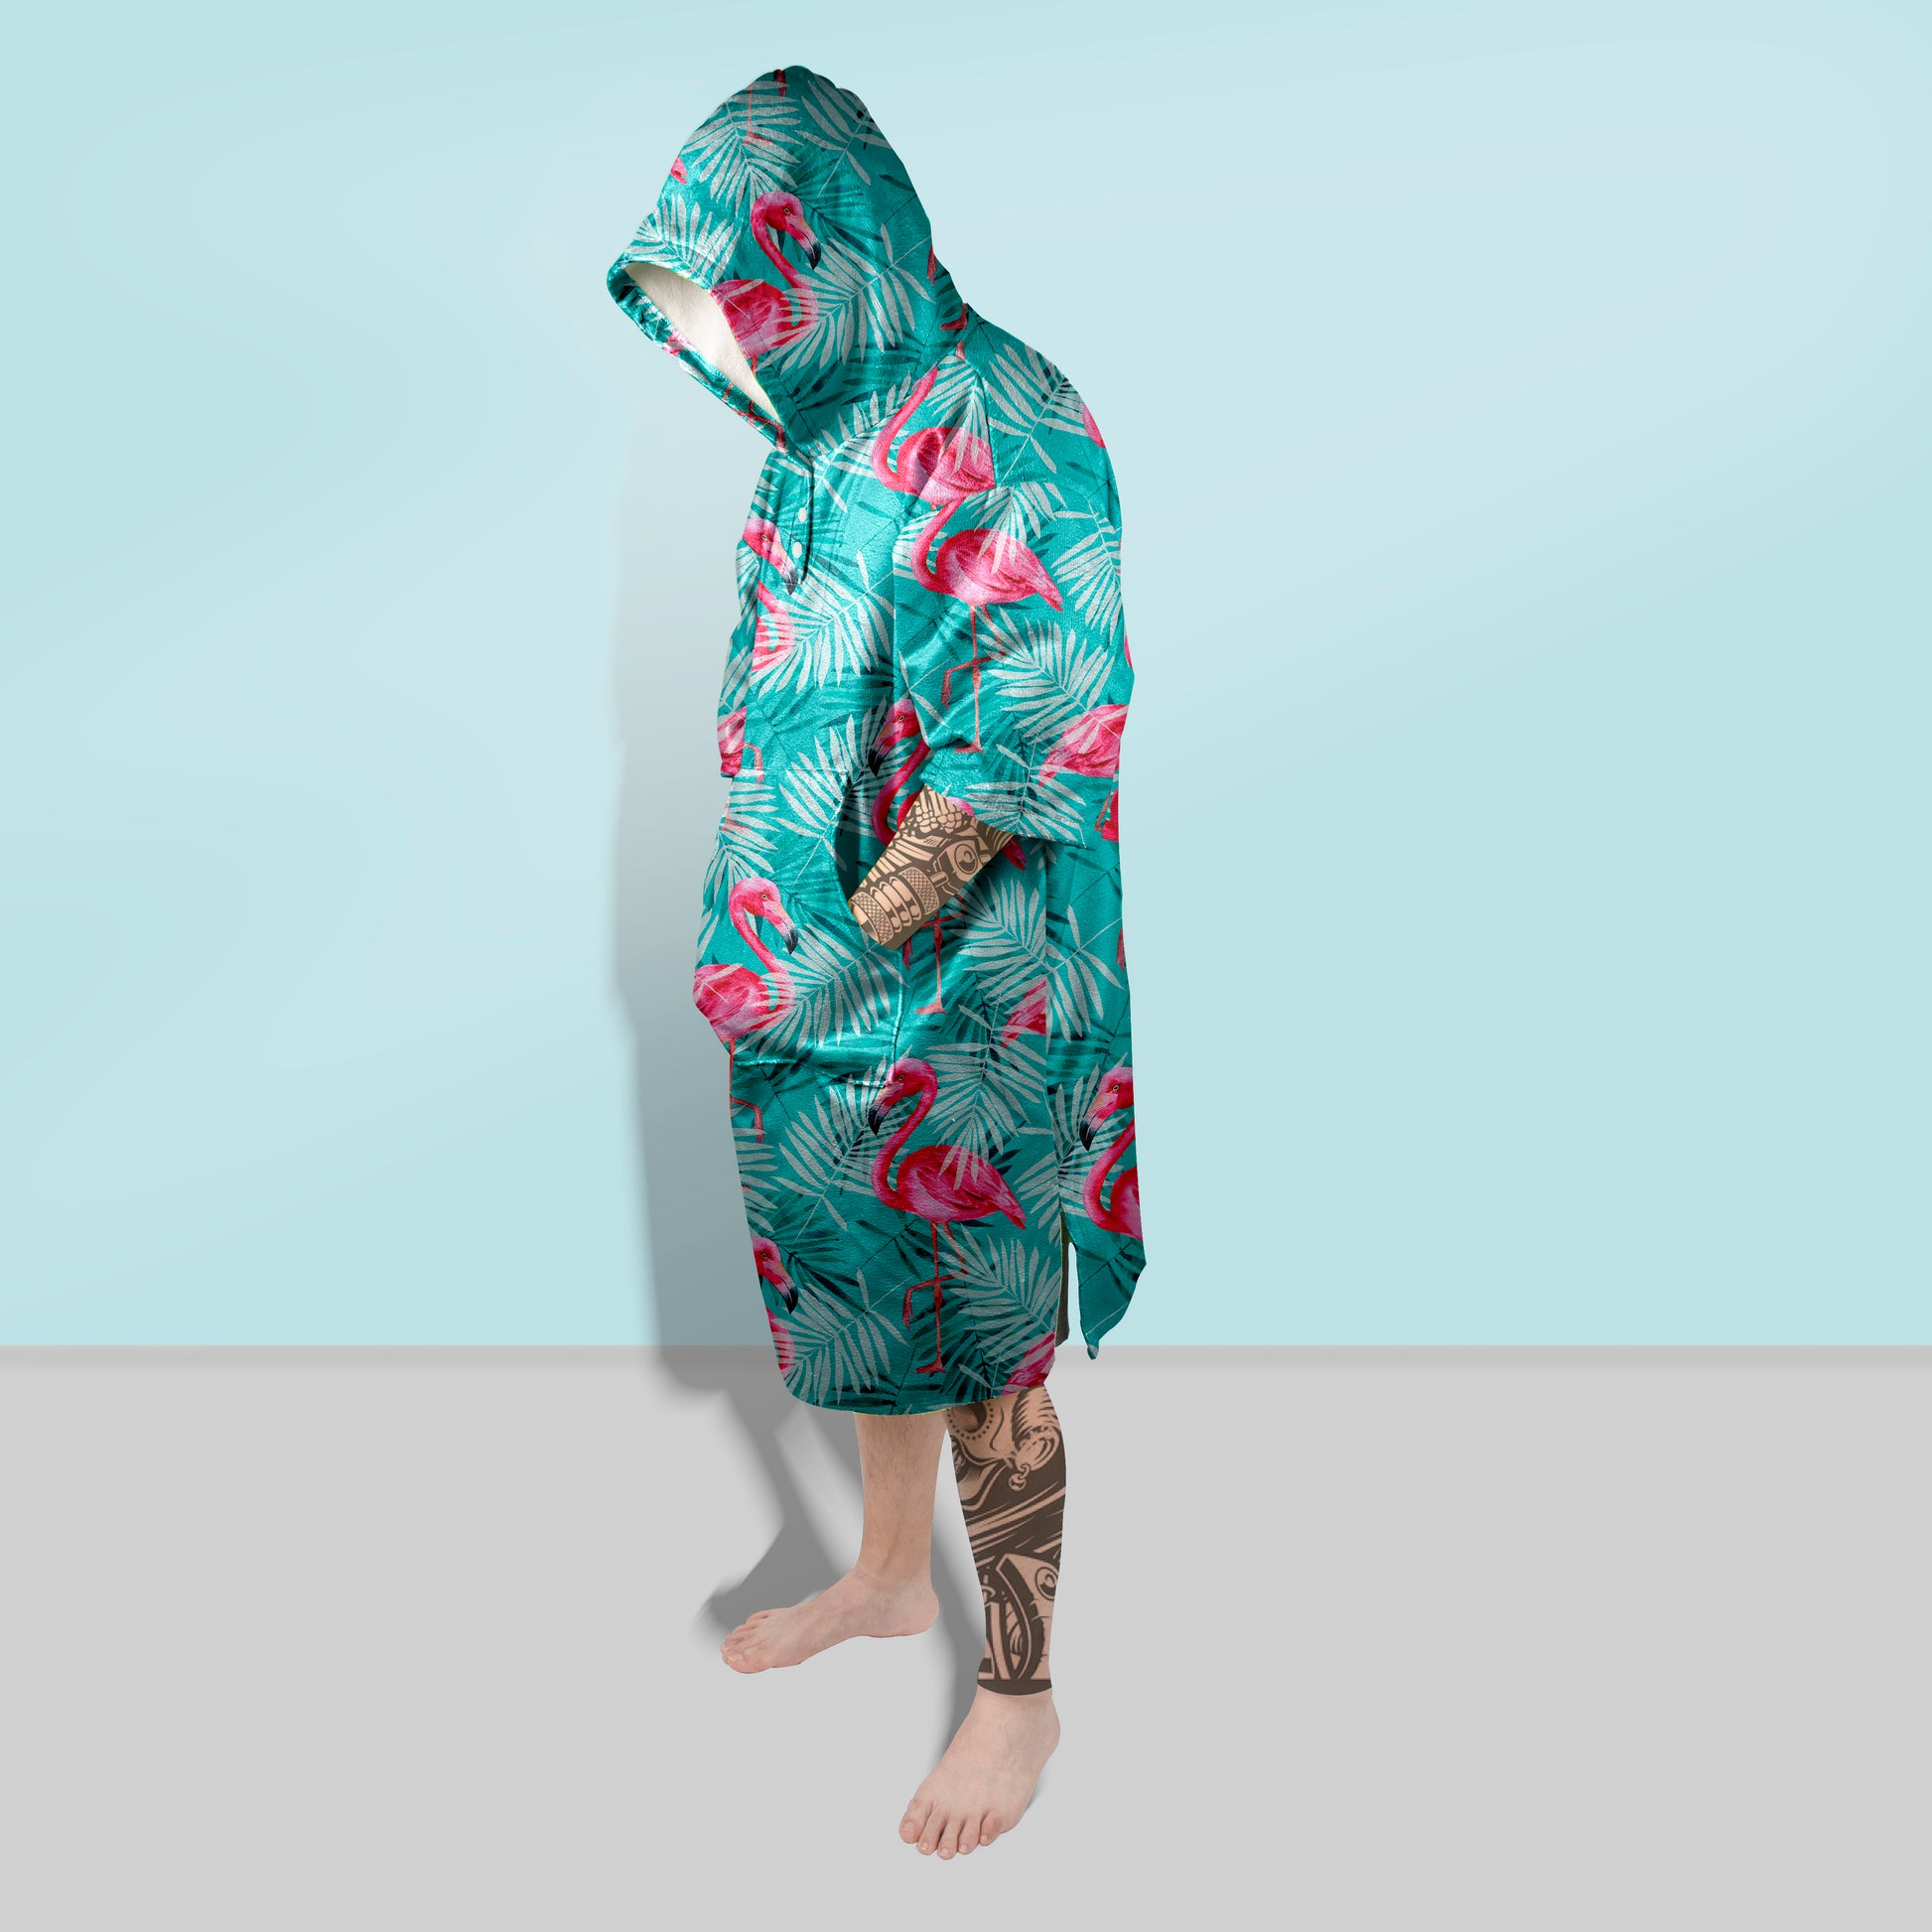 Personalized Flamingo Hooded Towel